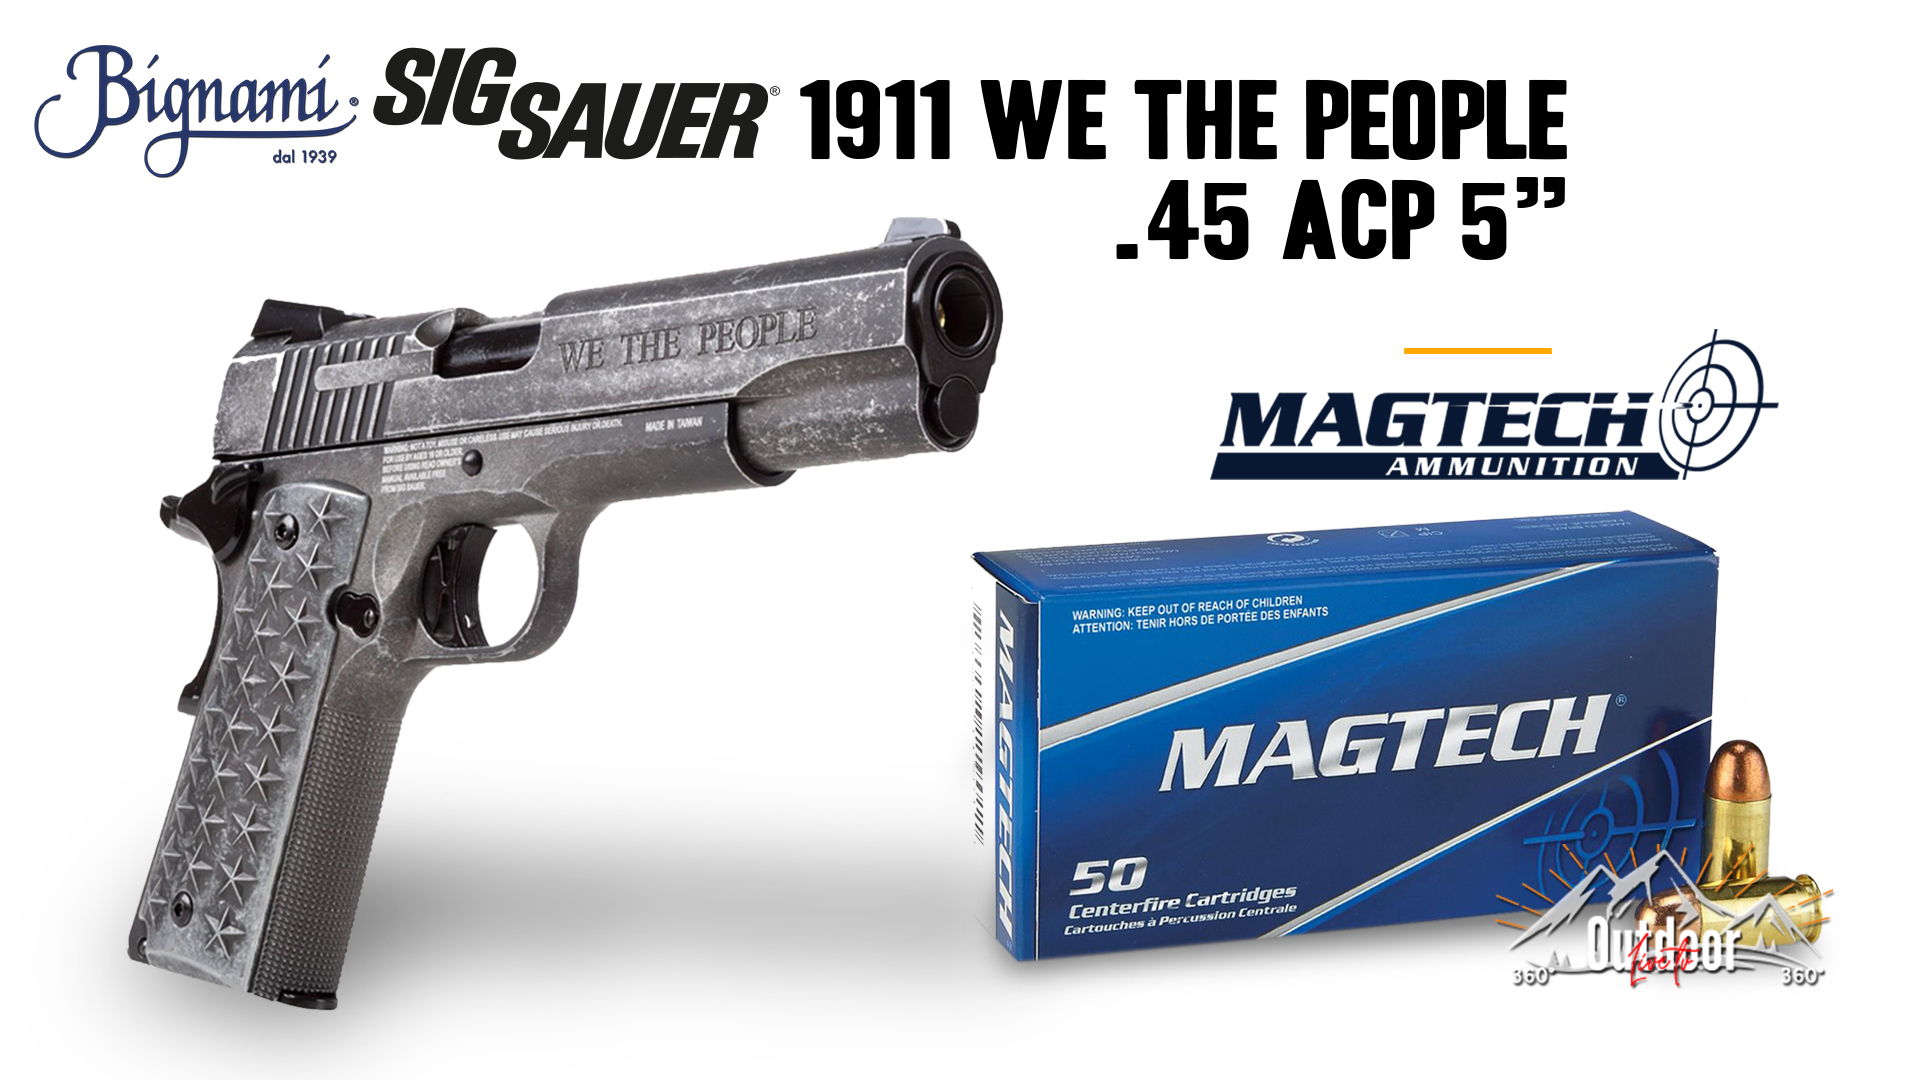 Sig Sauer 1911 WE THE PEOPLE cal.45 ACP – Magtech 230 grs FMJ